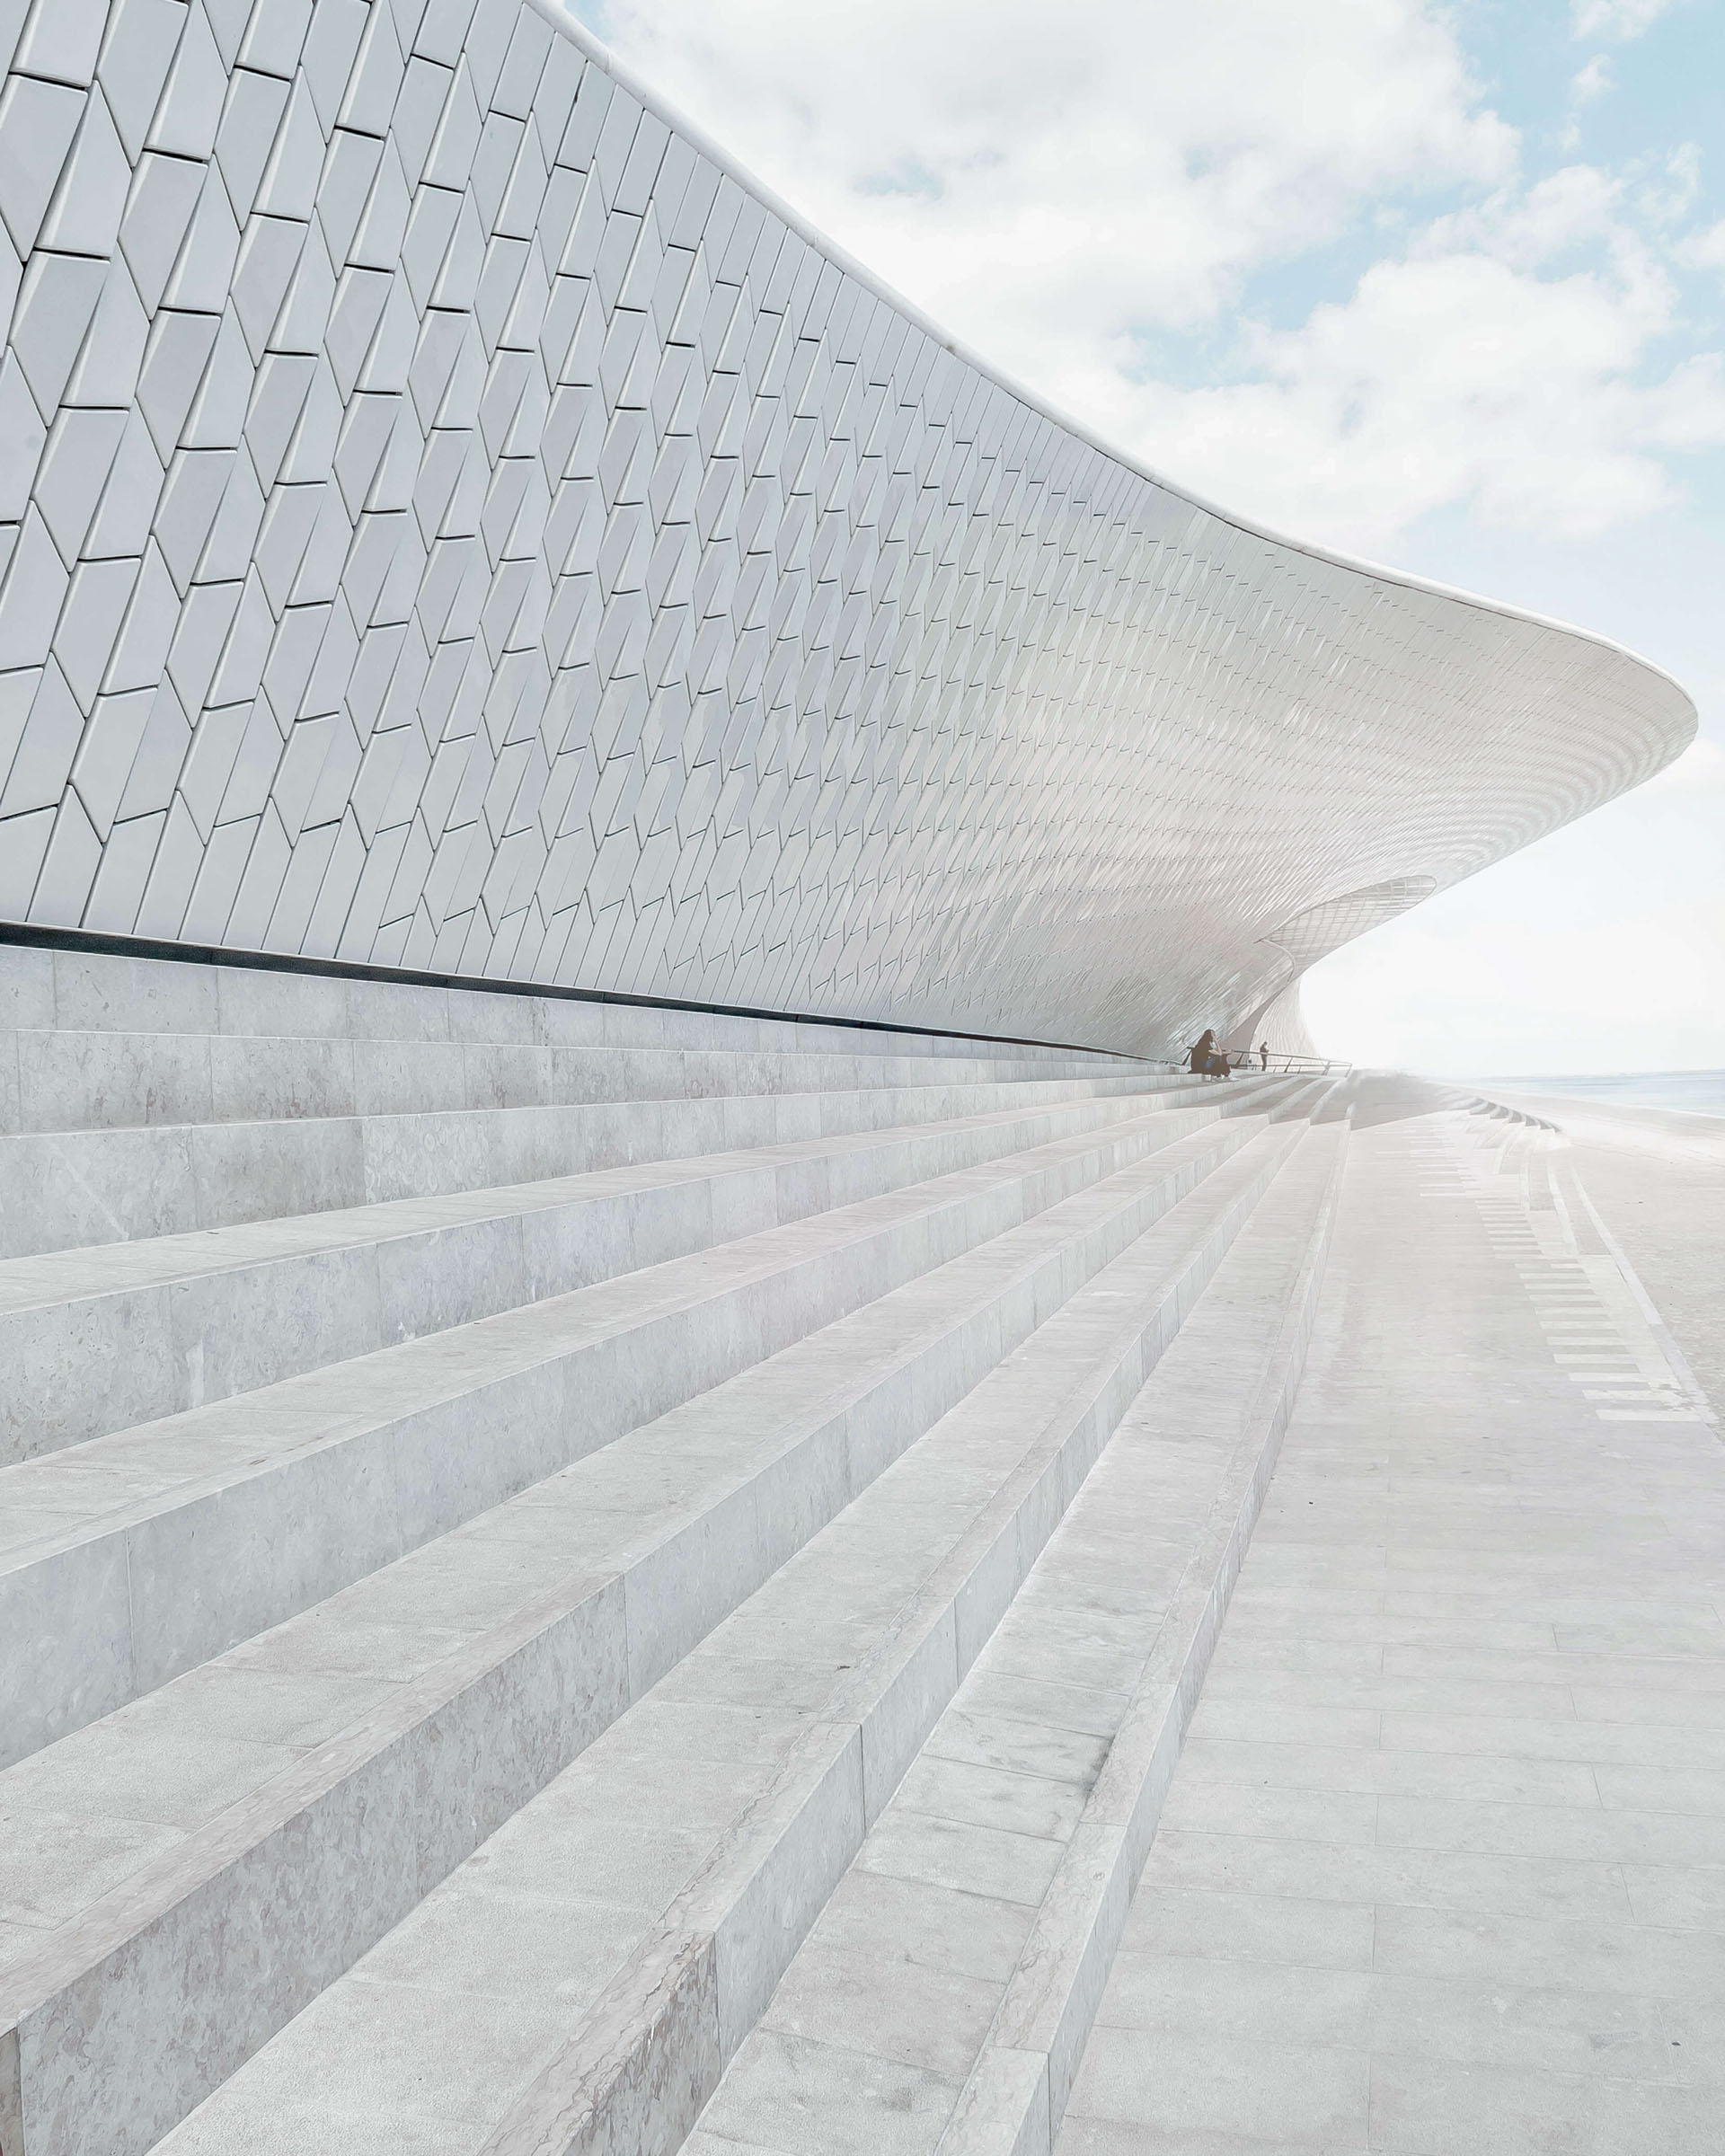 Photography: Exploring the The MAAT in Lisbon, Portugal